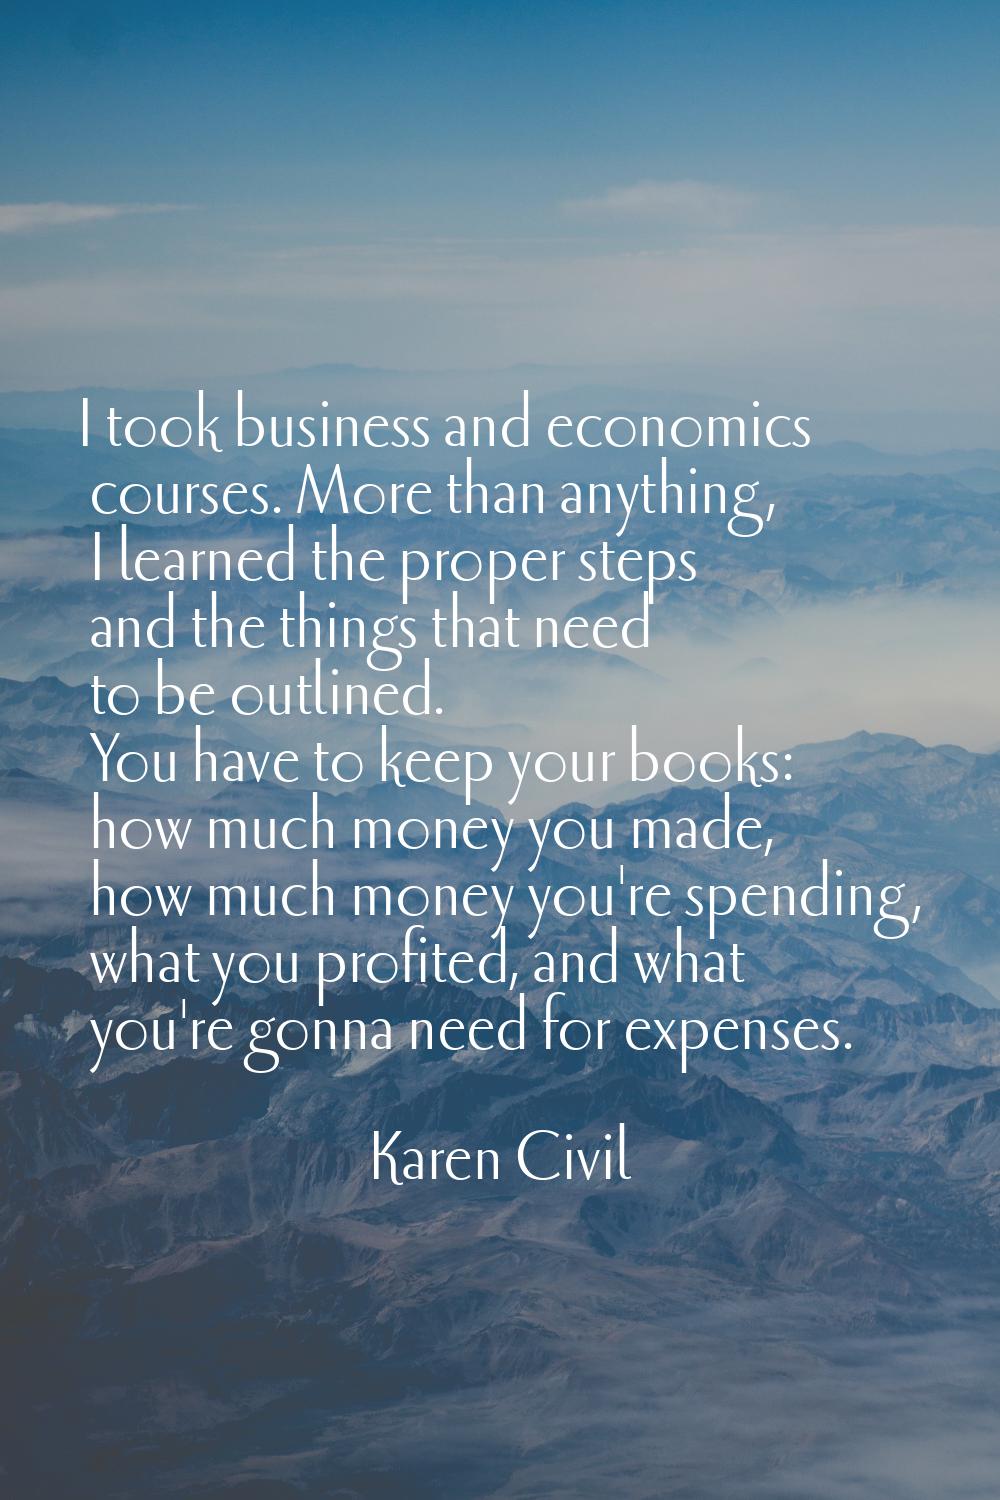 I took business and economics courses. More than anything, I learned the proper steps and the thing